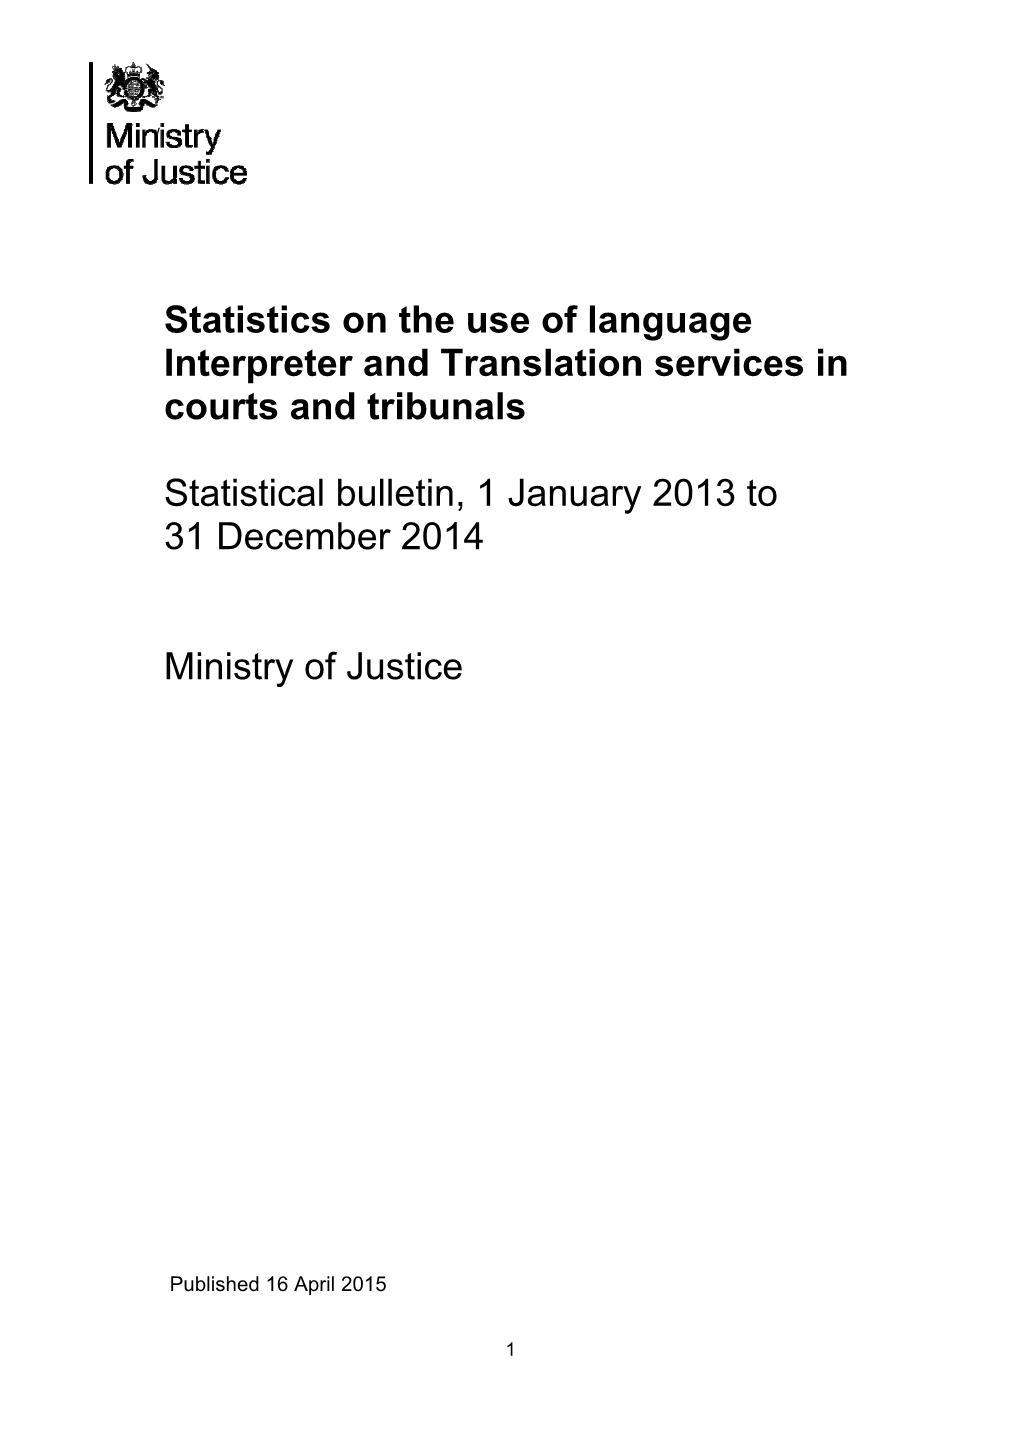 Statistics on the Use of Language Interpreter and Translation Services in Courts and Tribunals